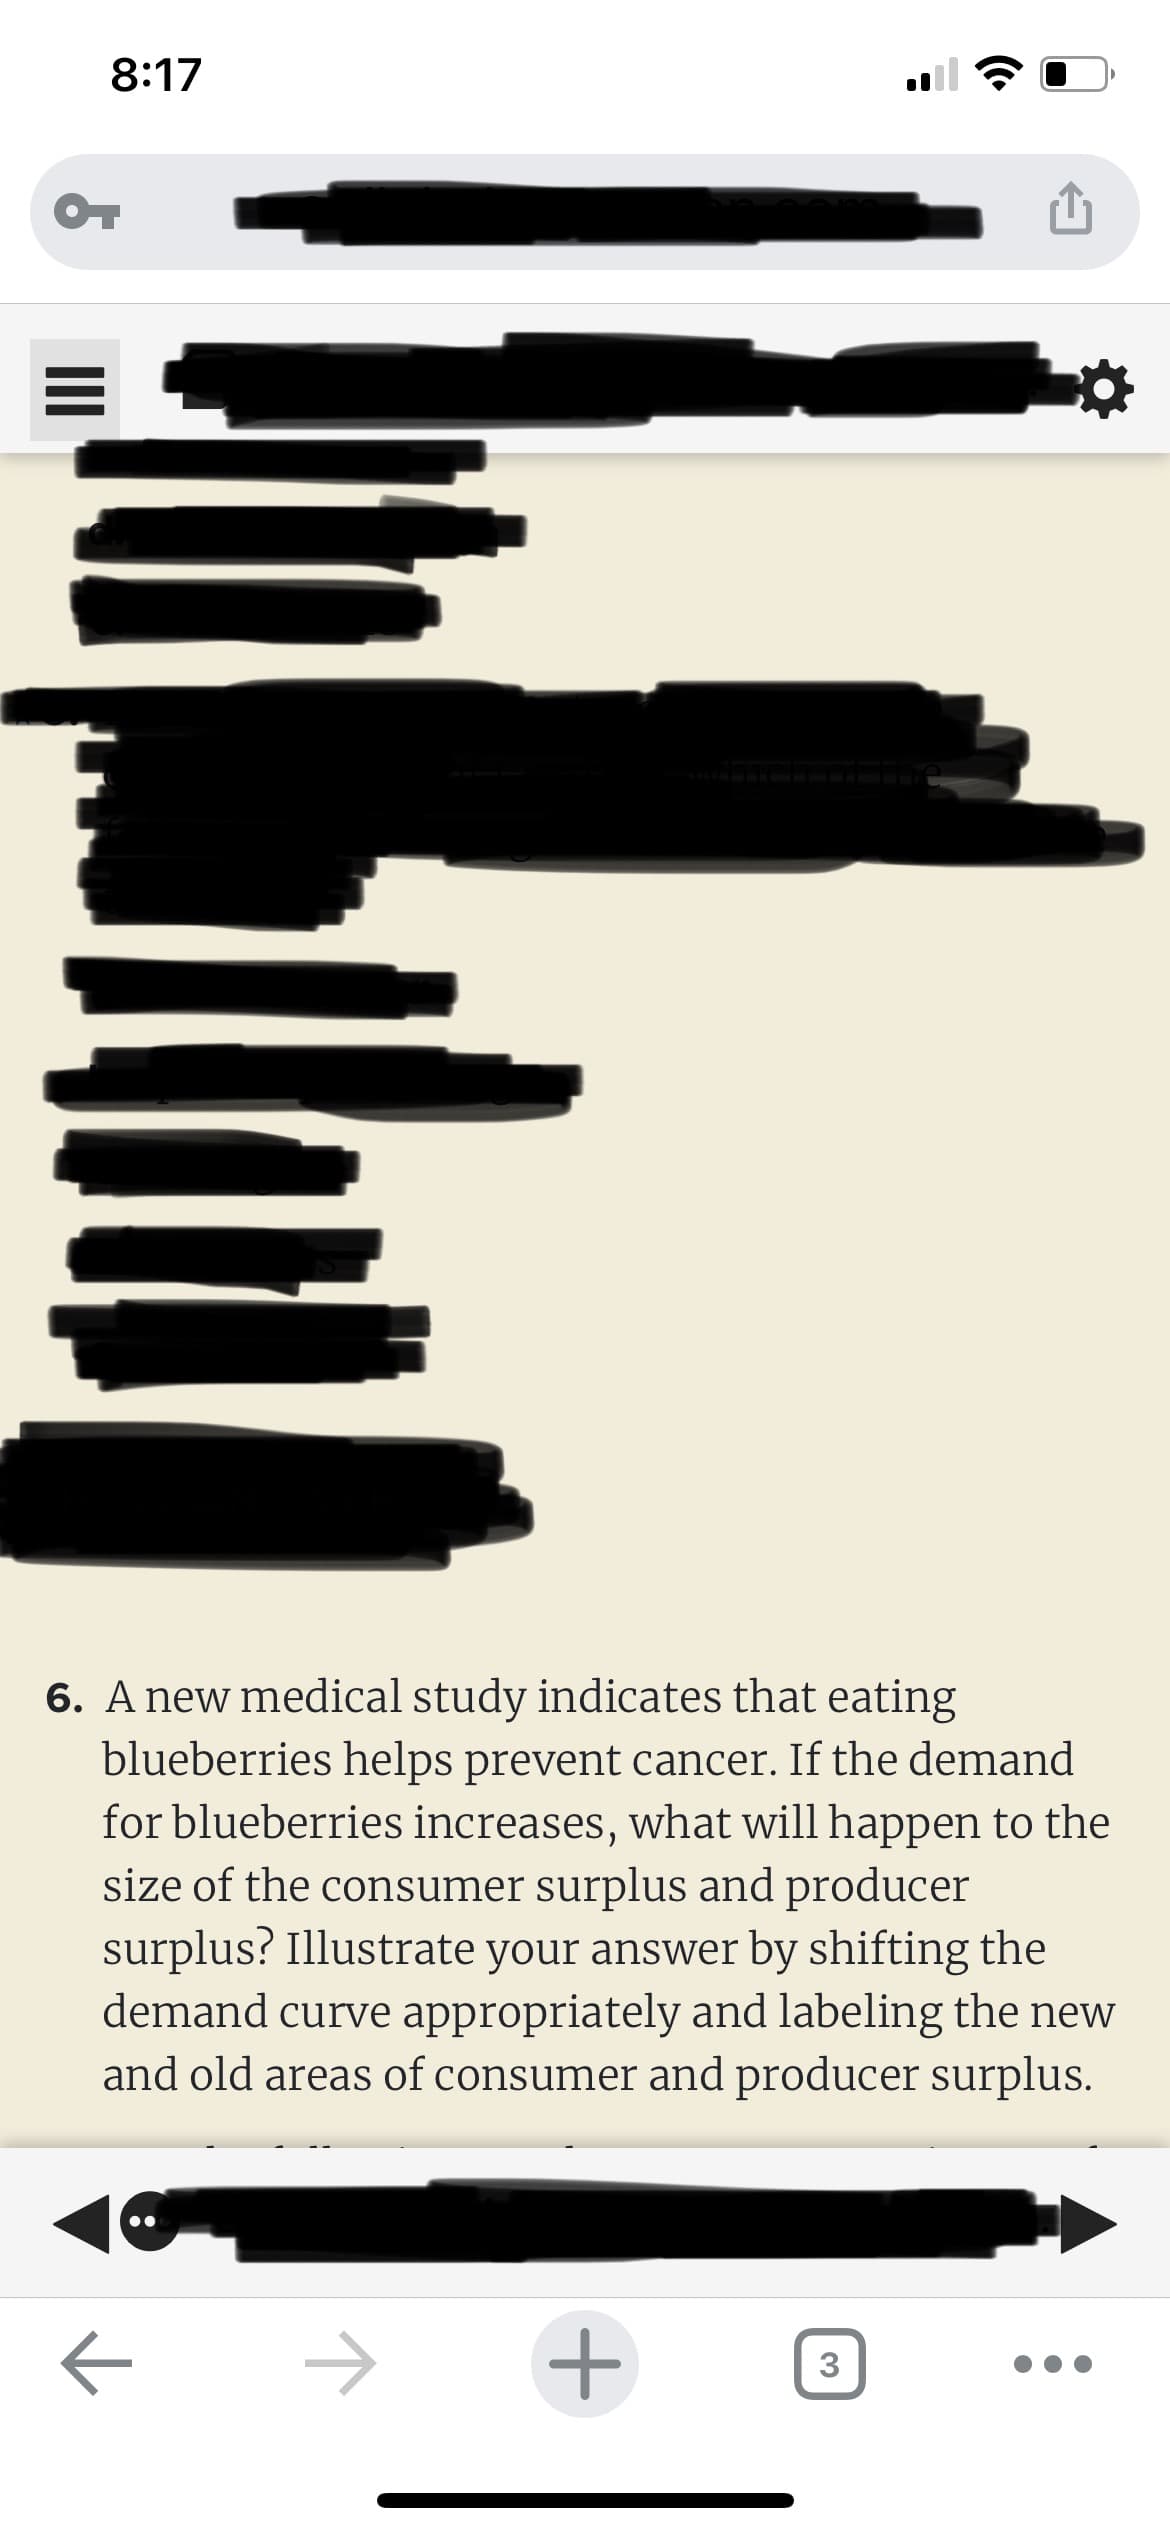 8:17
OT
6. A new medical study indicates that eating
blueberries helps prevent cancer. If the demand
for blueberries increases, what will happen to the
size of the consumer surplus and producer
surplus? Illustrate your answer by shifting the
demand curve appropriately and labeling the new
and old areas of consumer and producer surplus.
+
3